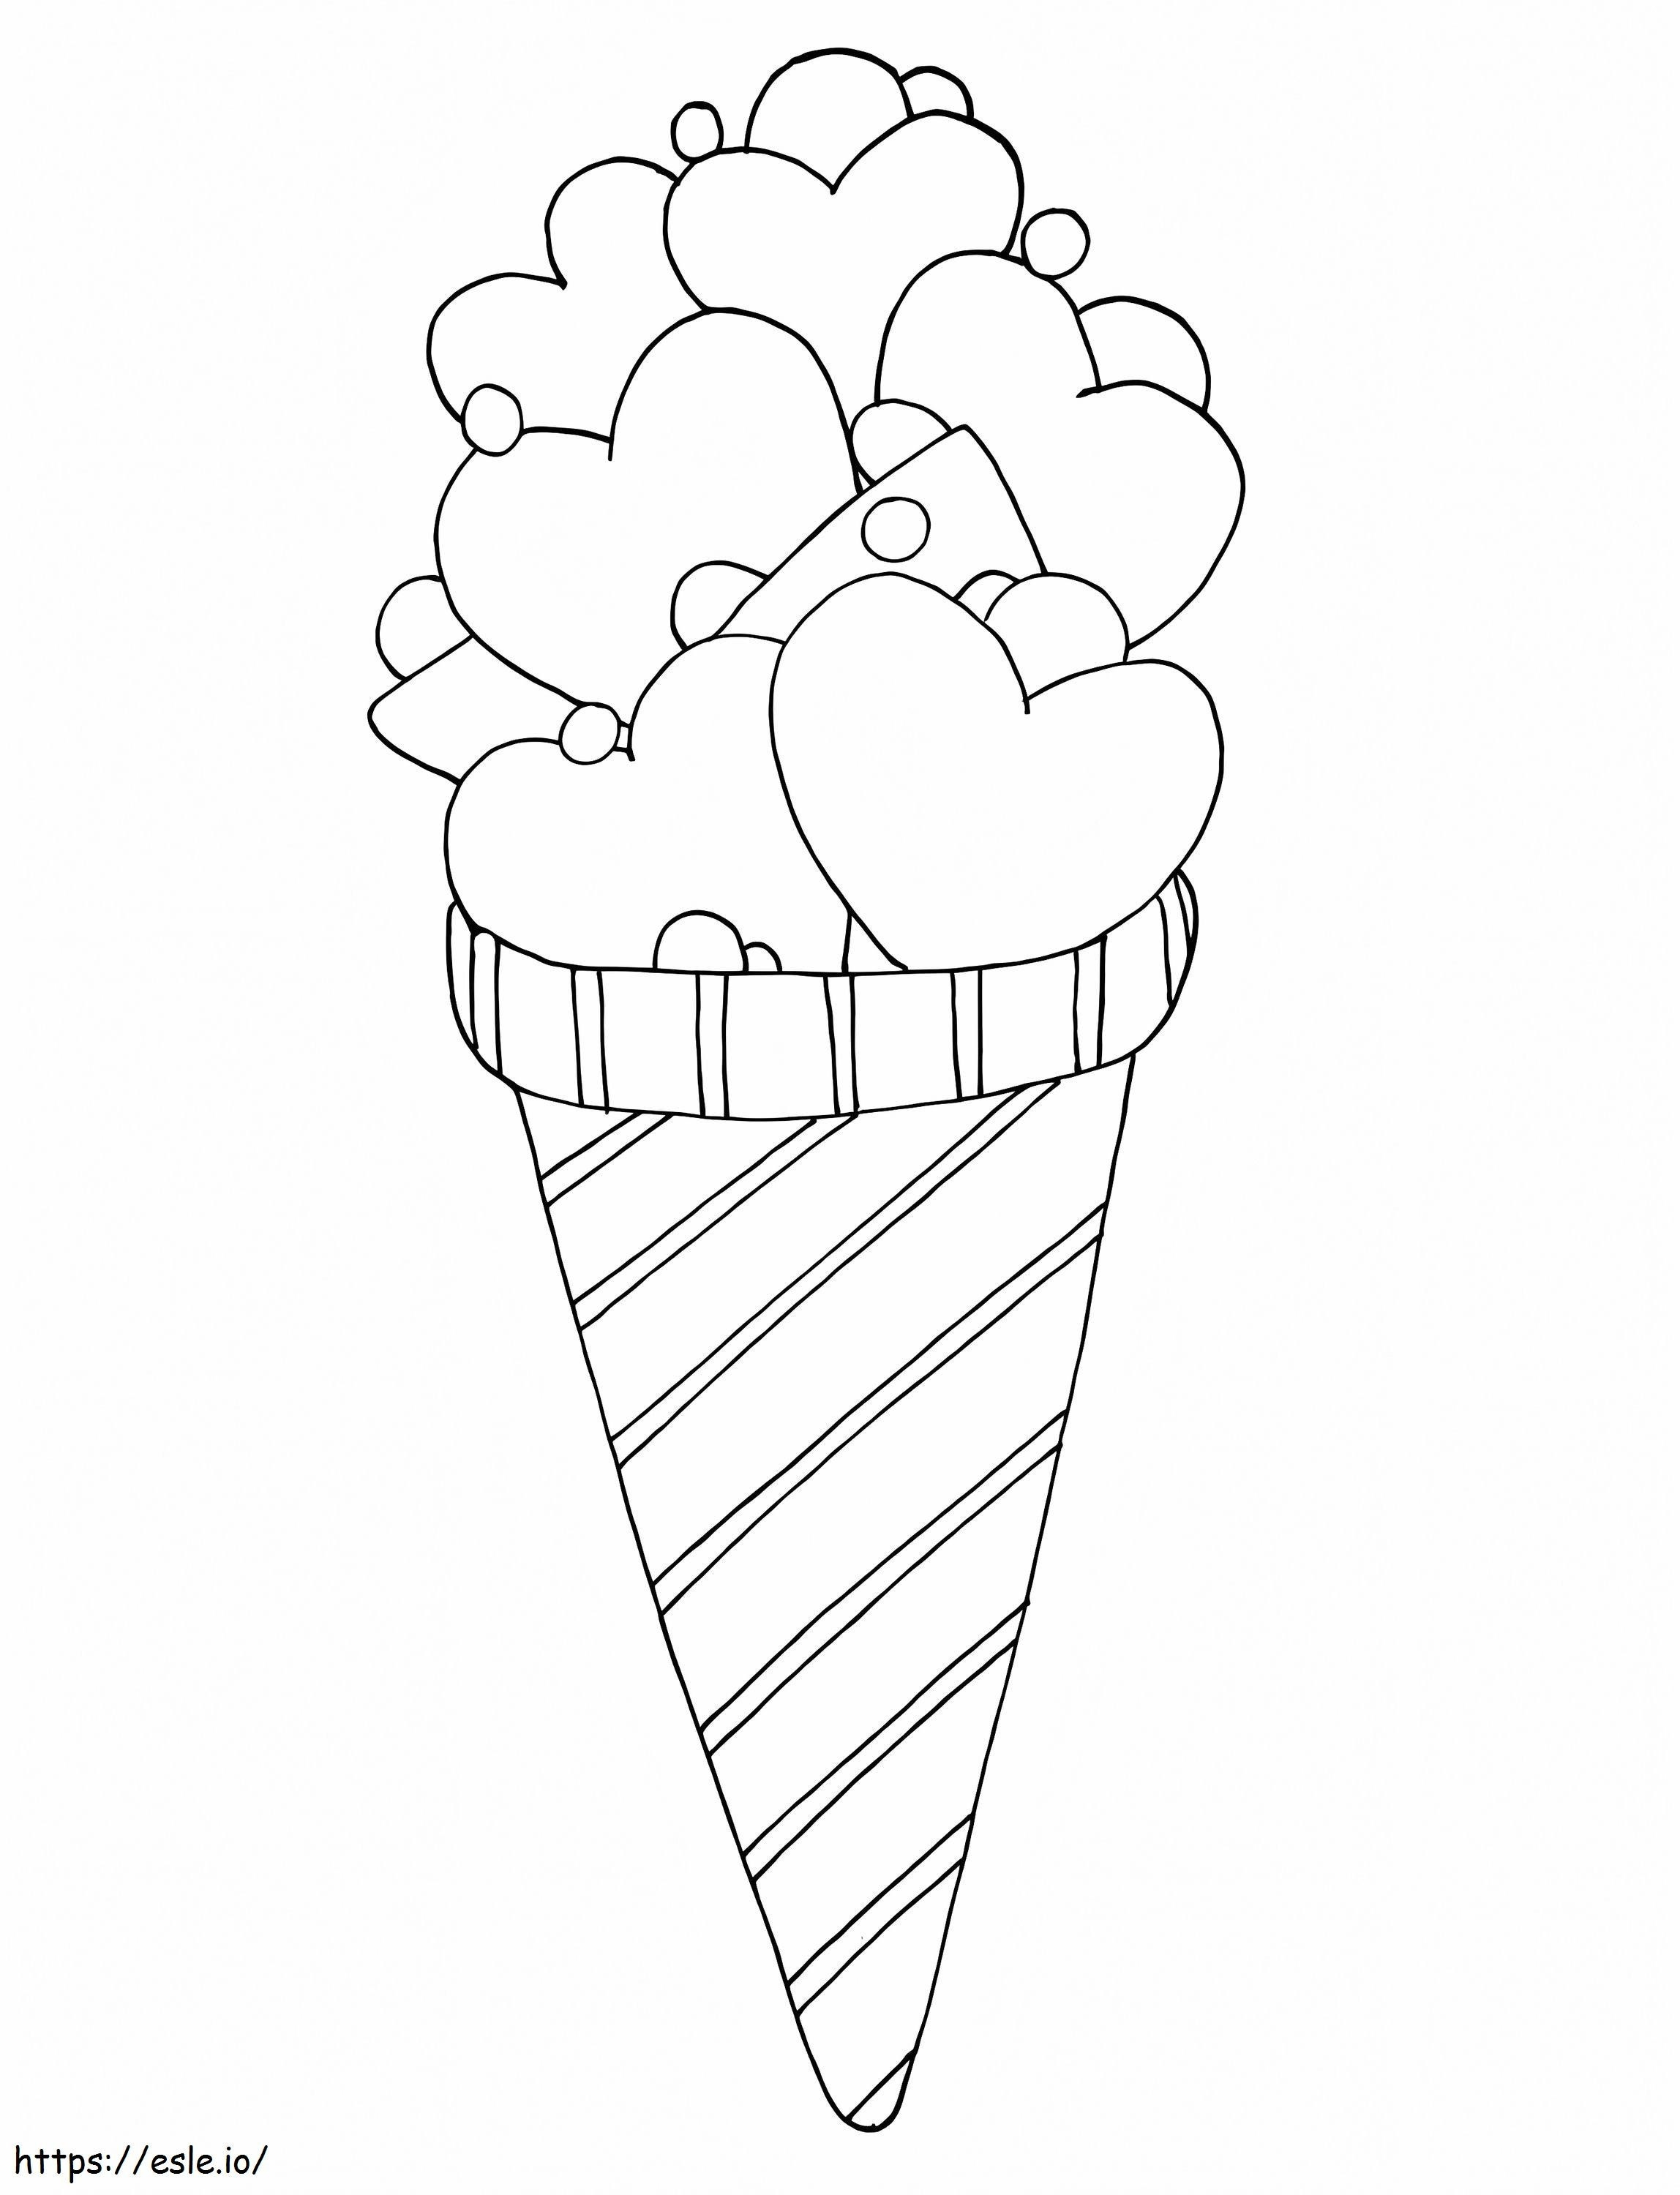 Love Ice Cream coloring page